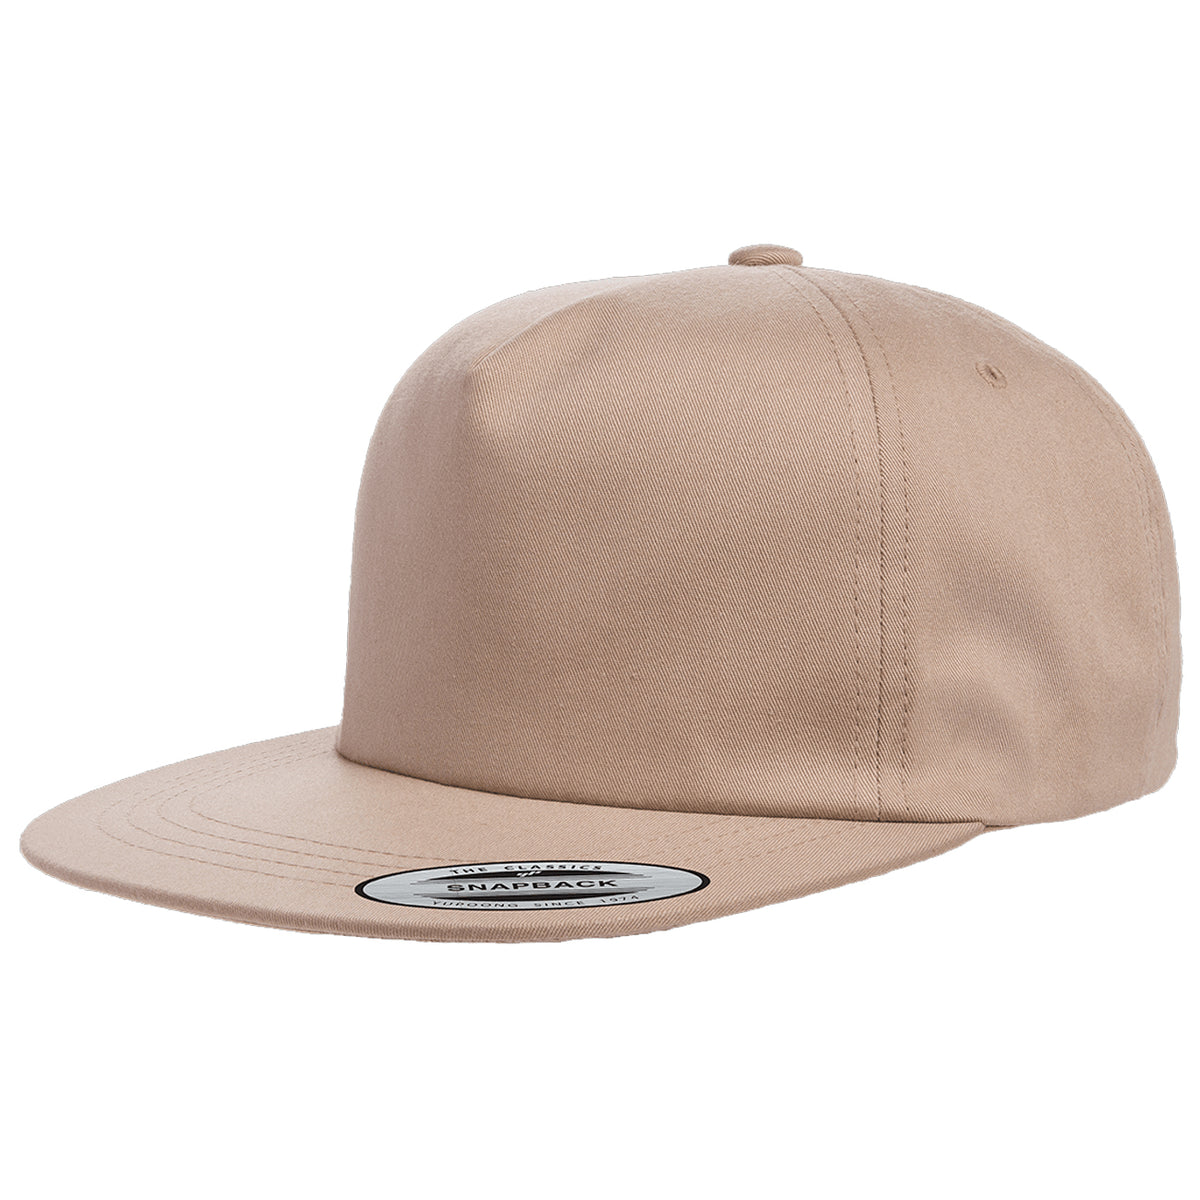 5-Panel USA 2040USA Yupoong – Caps Wholesale Blank | Snapback Flexfit Adjustable 2040 Classics from Unstructured